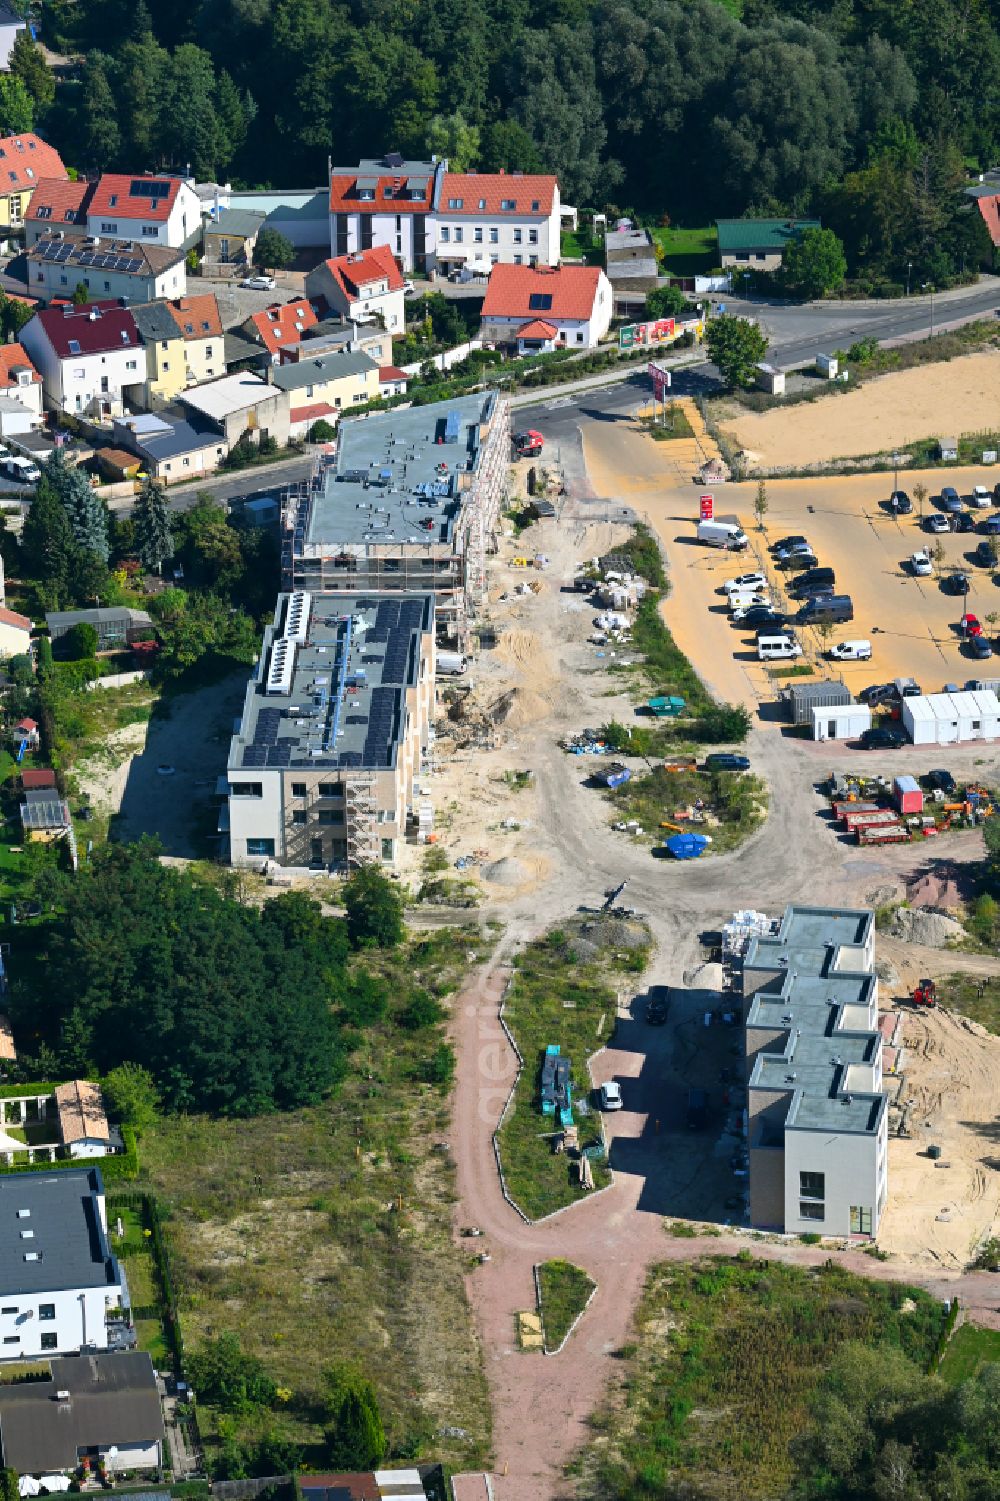 Caputh from the bird's eye view: Construction site for the new construction of two multi-family residential buildings in the Blumenviertel on street Kirschanger in Caputh in the state Brandenburg, Germany